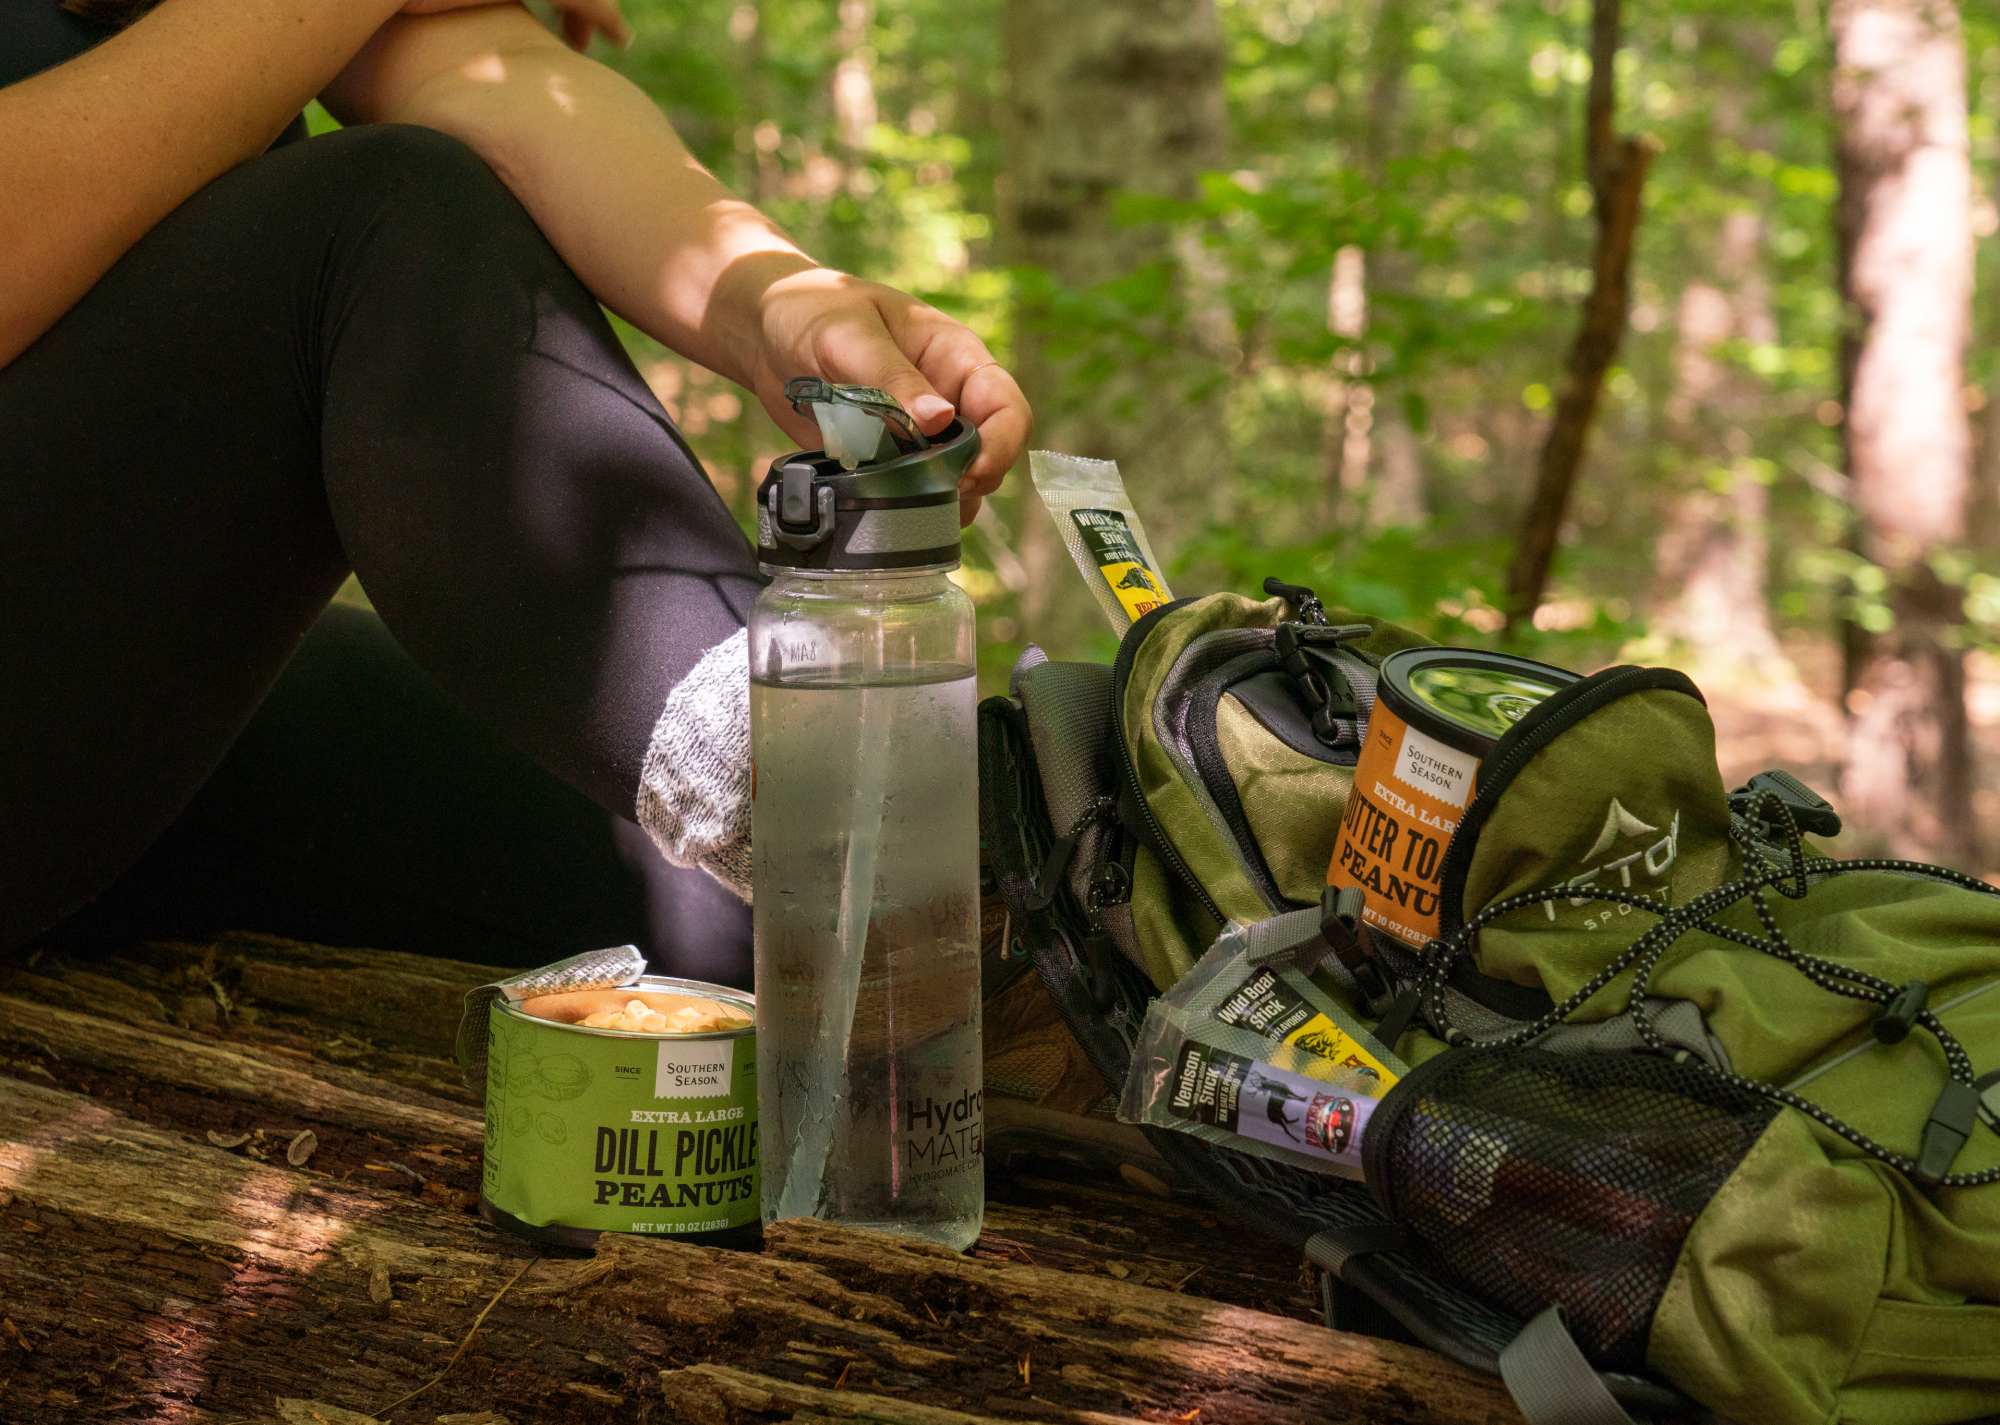 Stopping for a snack while on the trail, hiking with a backpack full of Southern Season Peanuts